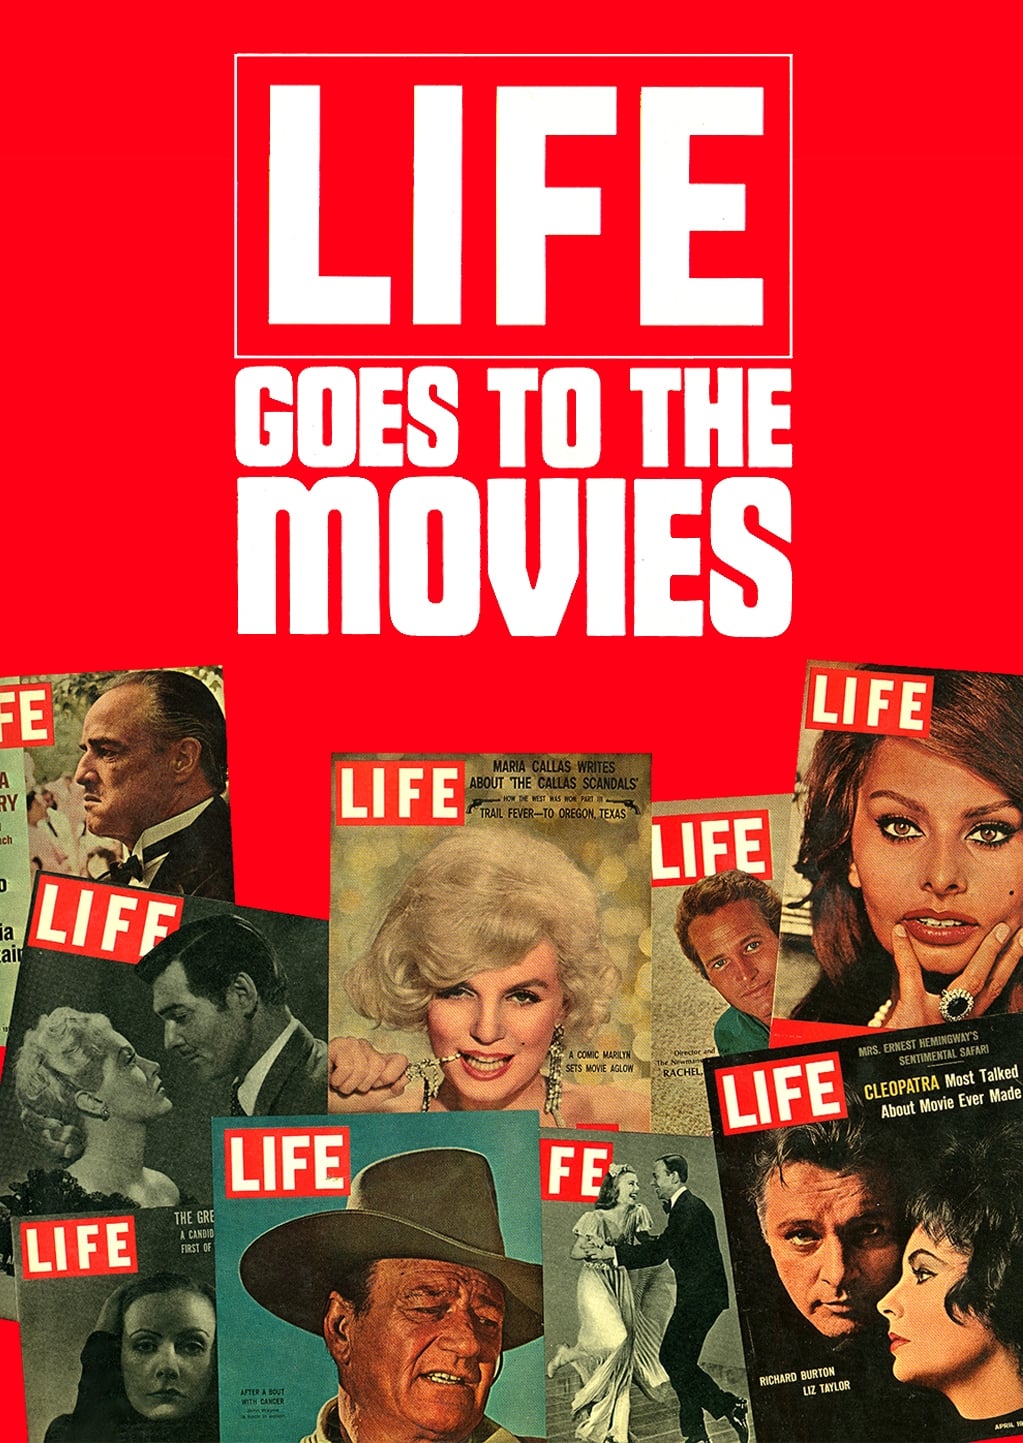 LIFE Goes to the Movies